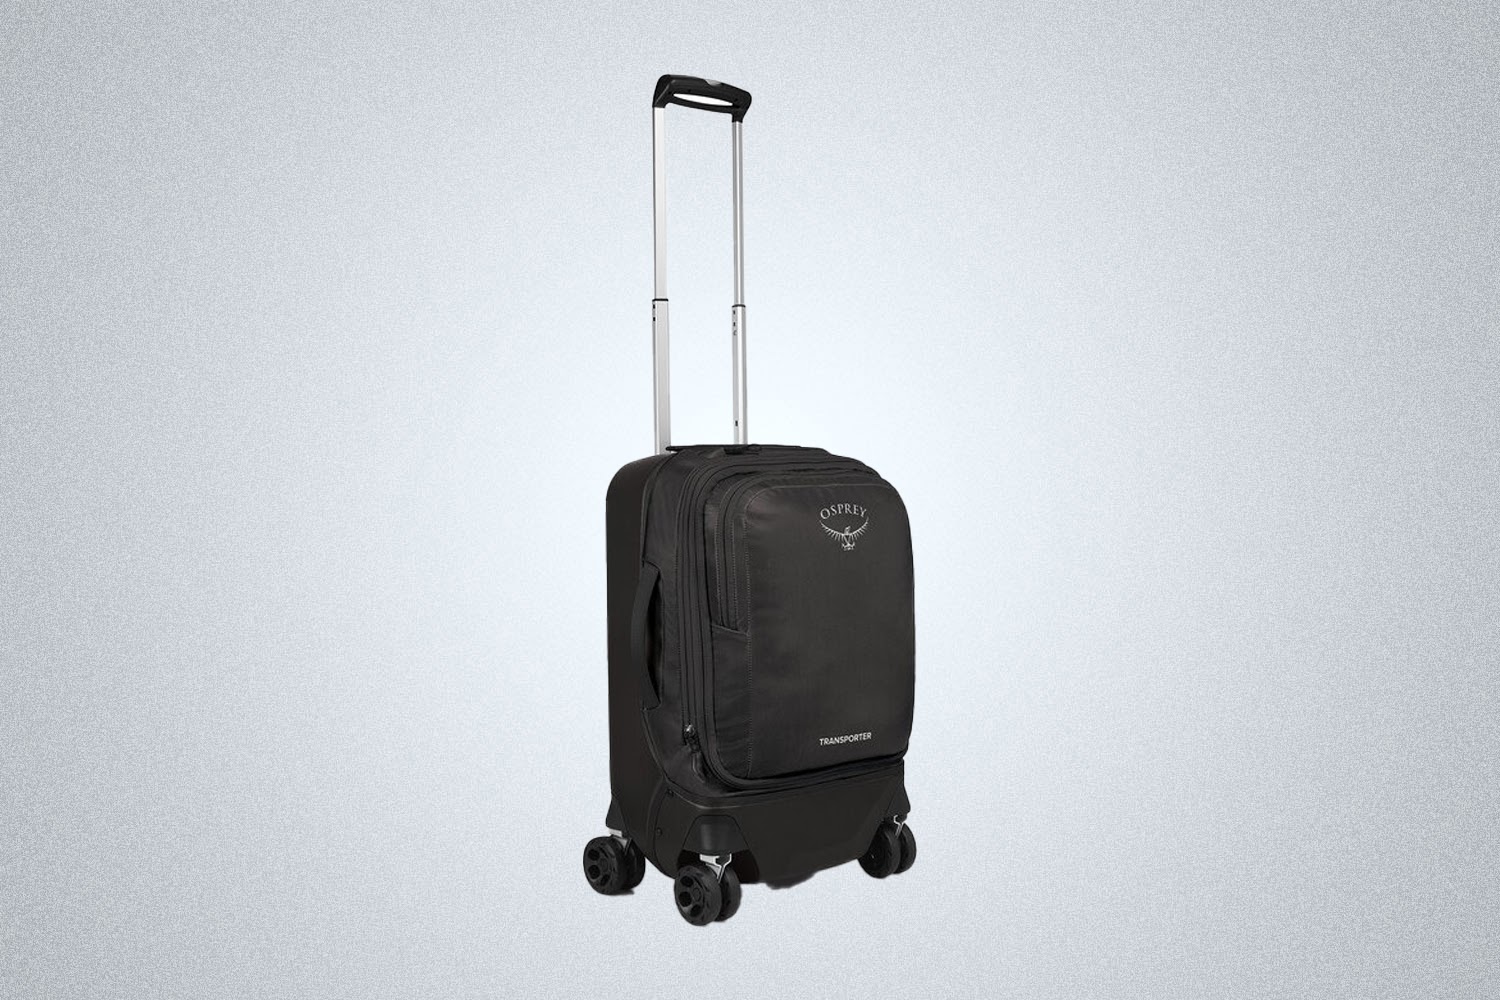 a roller bag with a handle and wheels from Osprey